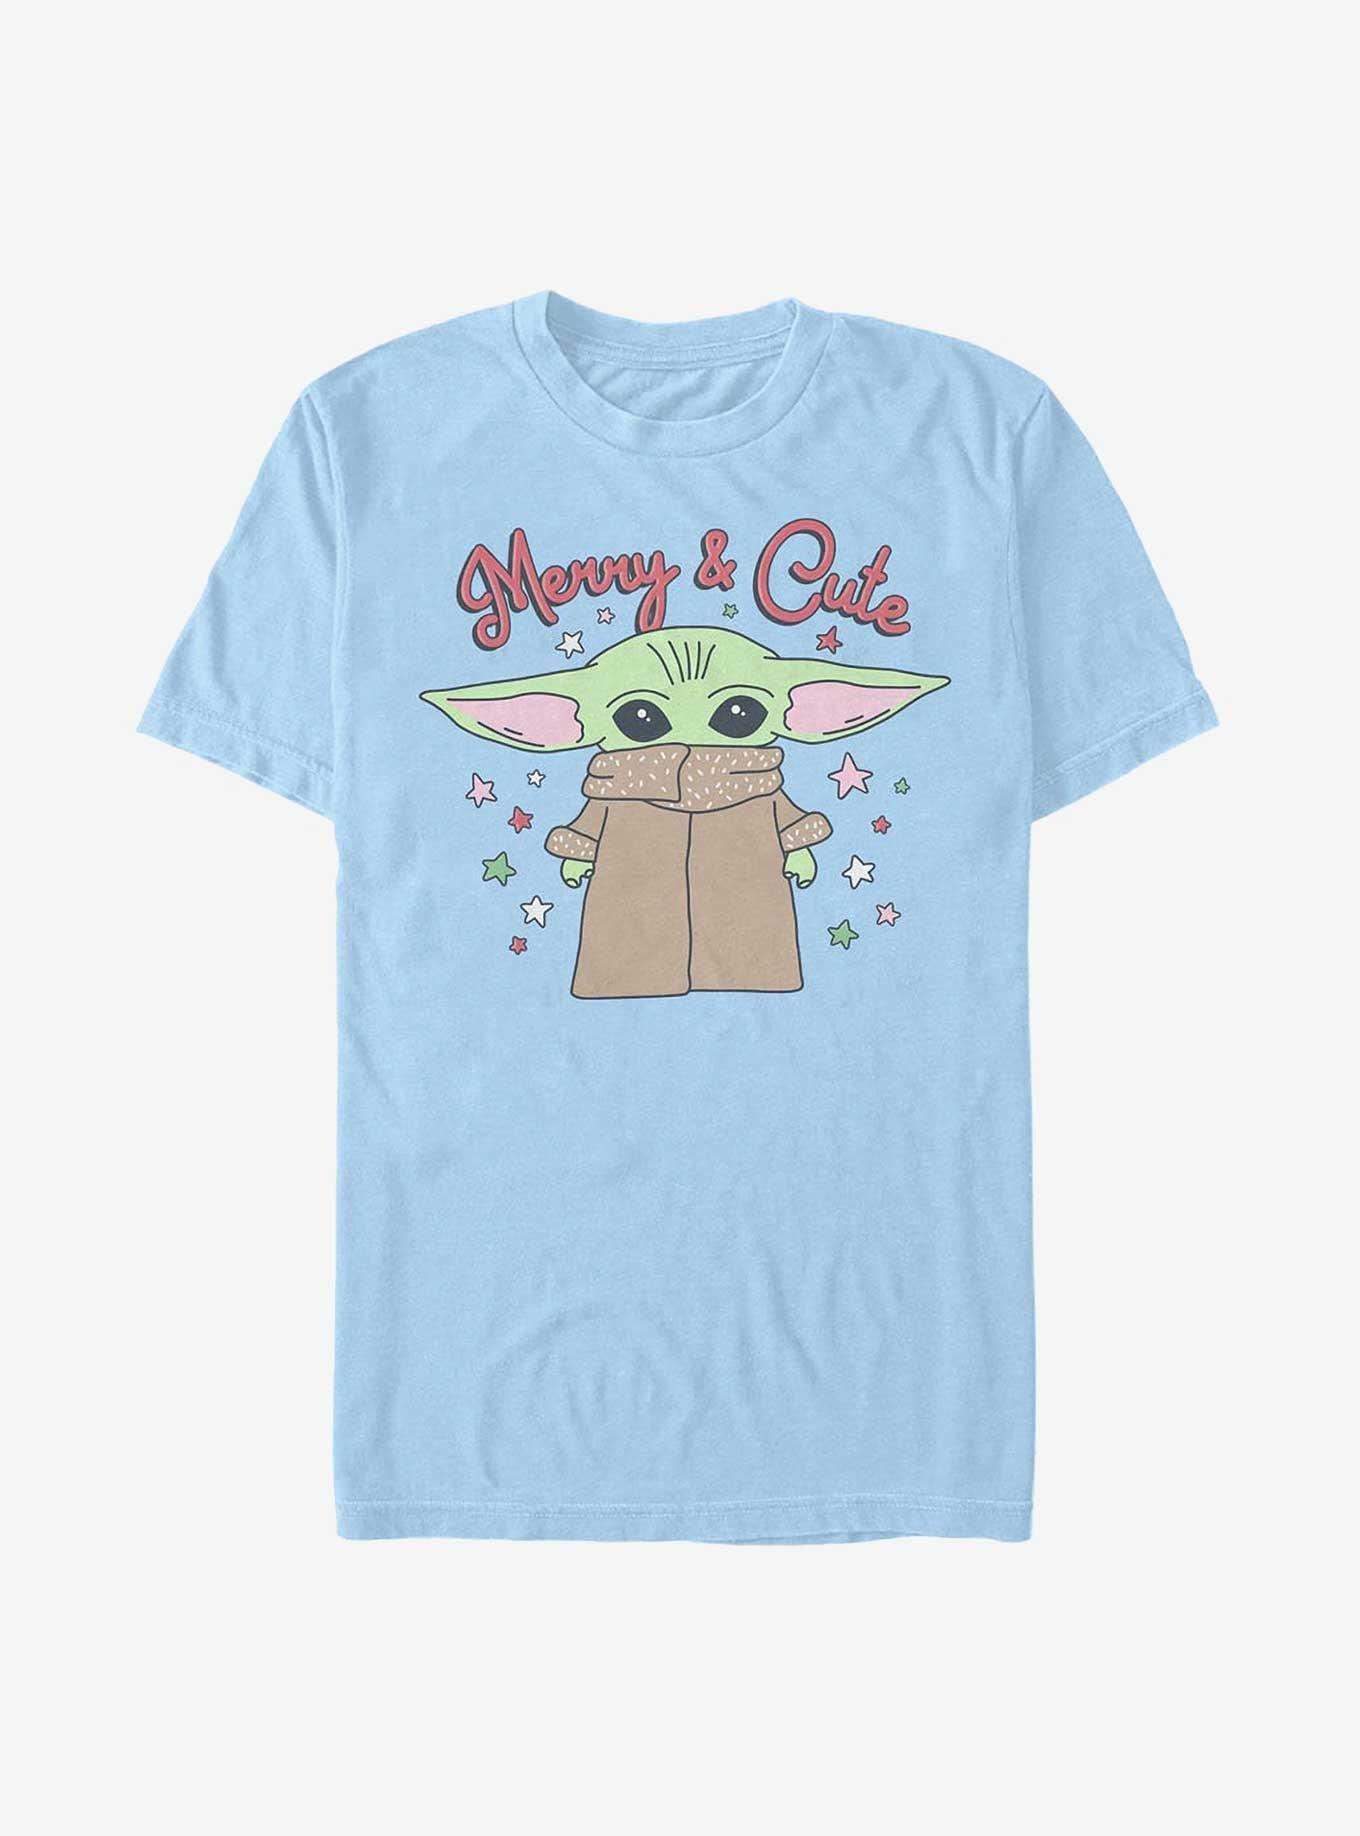 Star Wars The Mandalorian Merry And Cute The Child T-Shirt, LT BLUE, hi-res